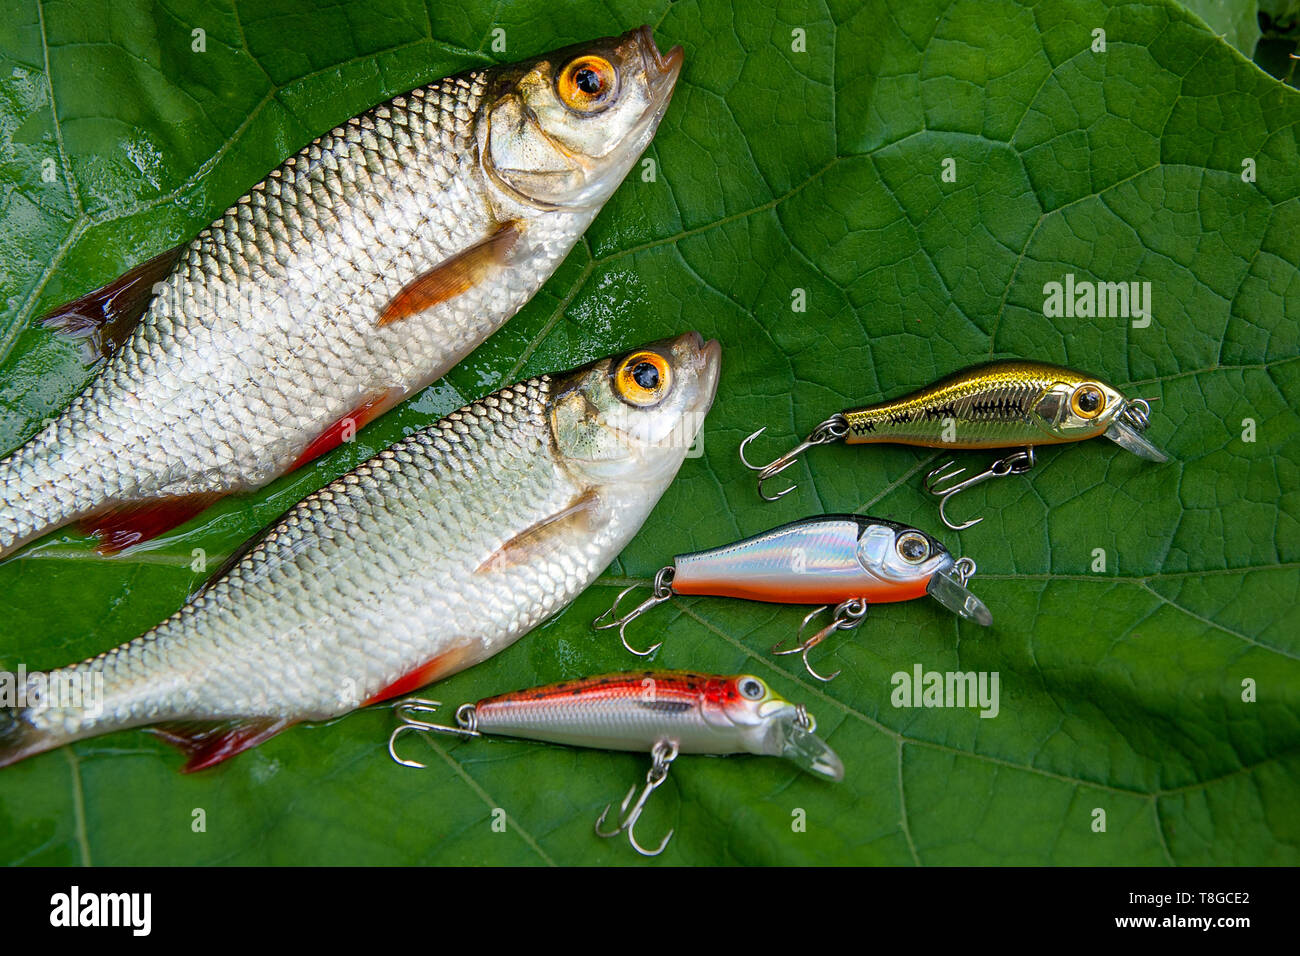 https://c8.alamy.com/comp/T8GCE2/freshwater-fish-just-taken-from-the-water-common-rudd-fish-and-several-fishing-baits-on-big-green-leaf-T8GCE2.jpg